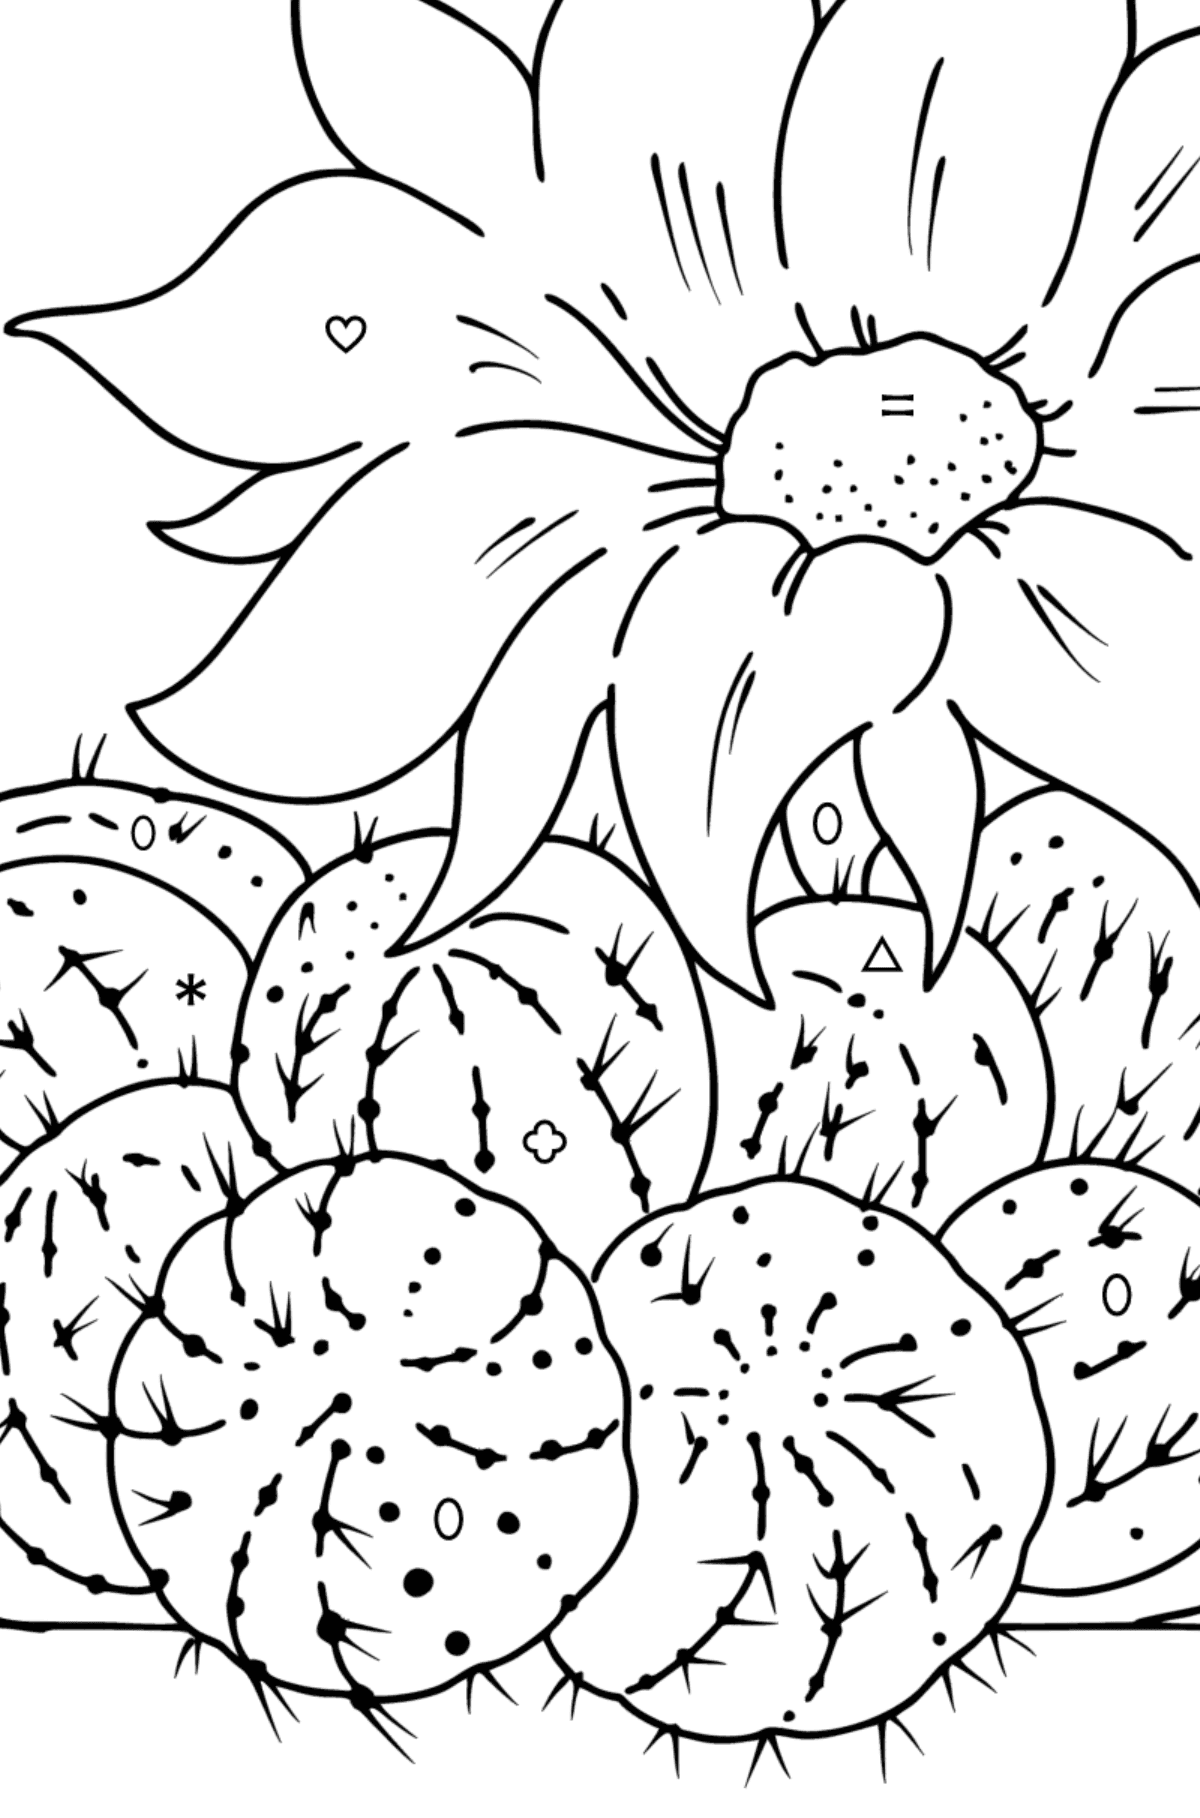 Little Nipple Cactus Coloring page - Coloring by Symbols and Geometric Shapes for Kids